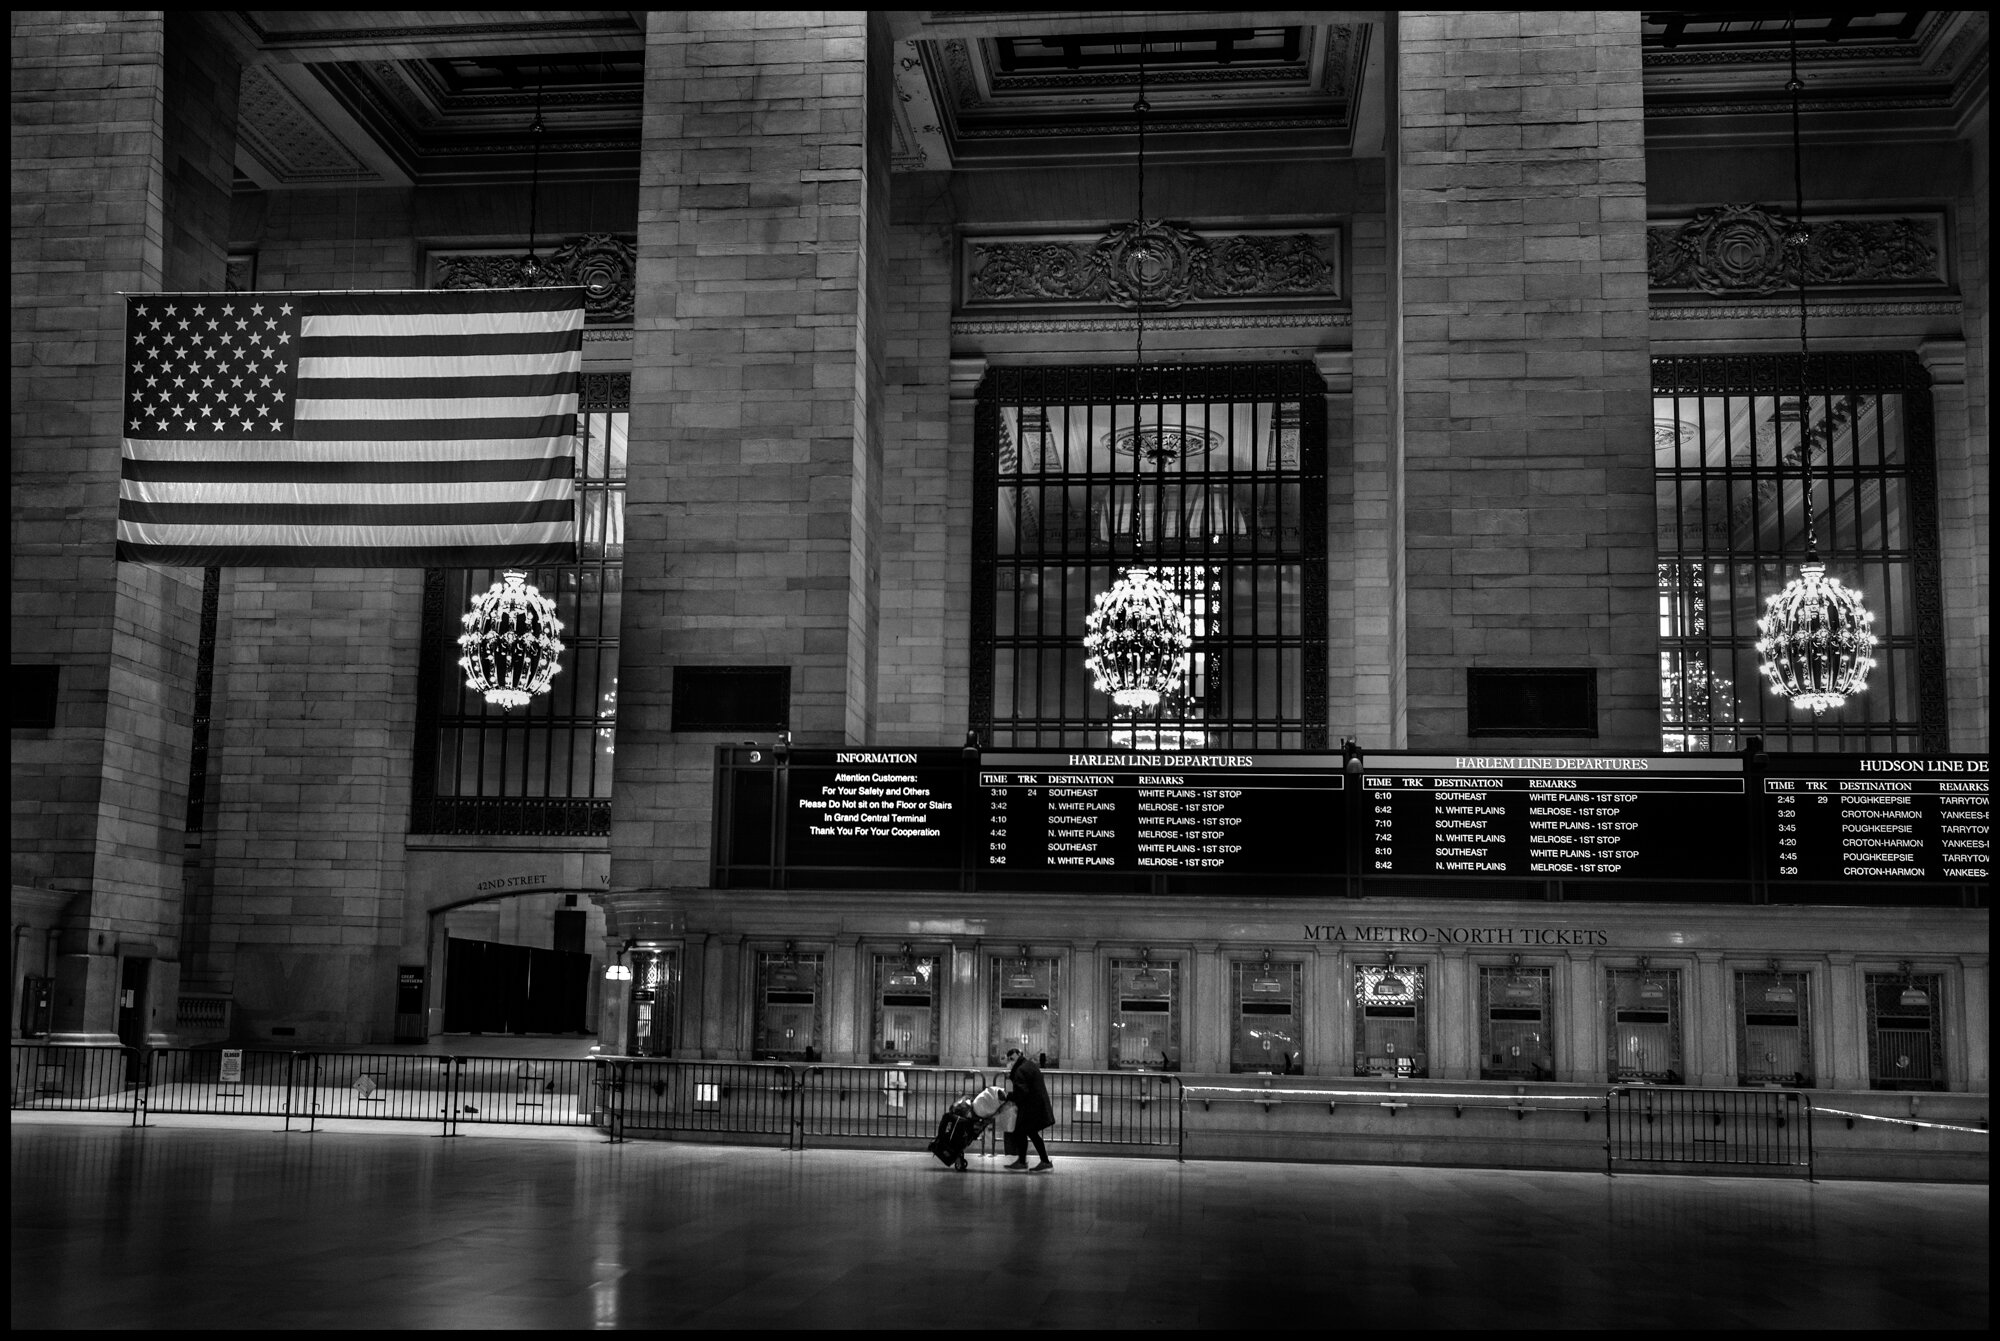  Grand Central Station, New York.  April 18, 2020. © Peter Turnley  ID# 25-001 